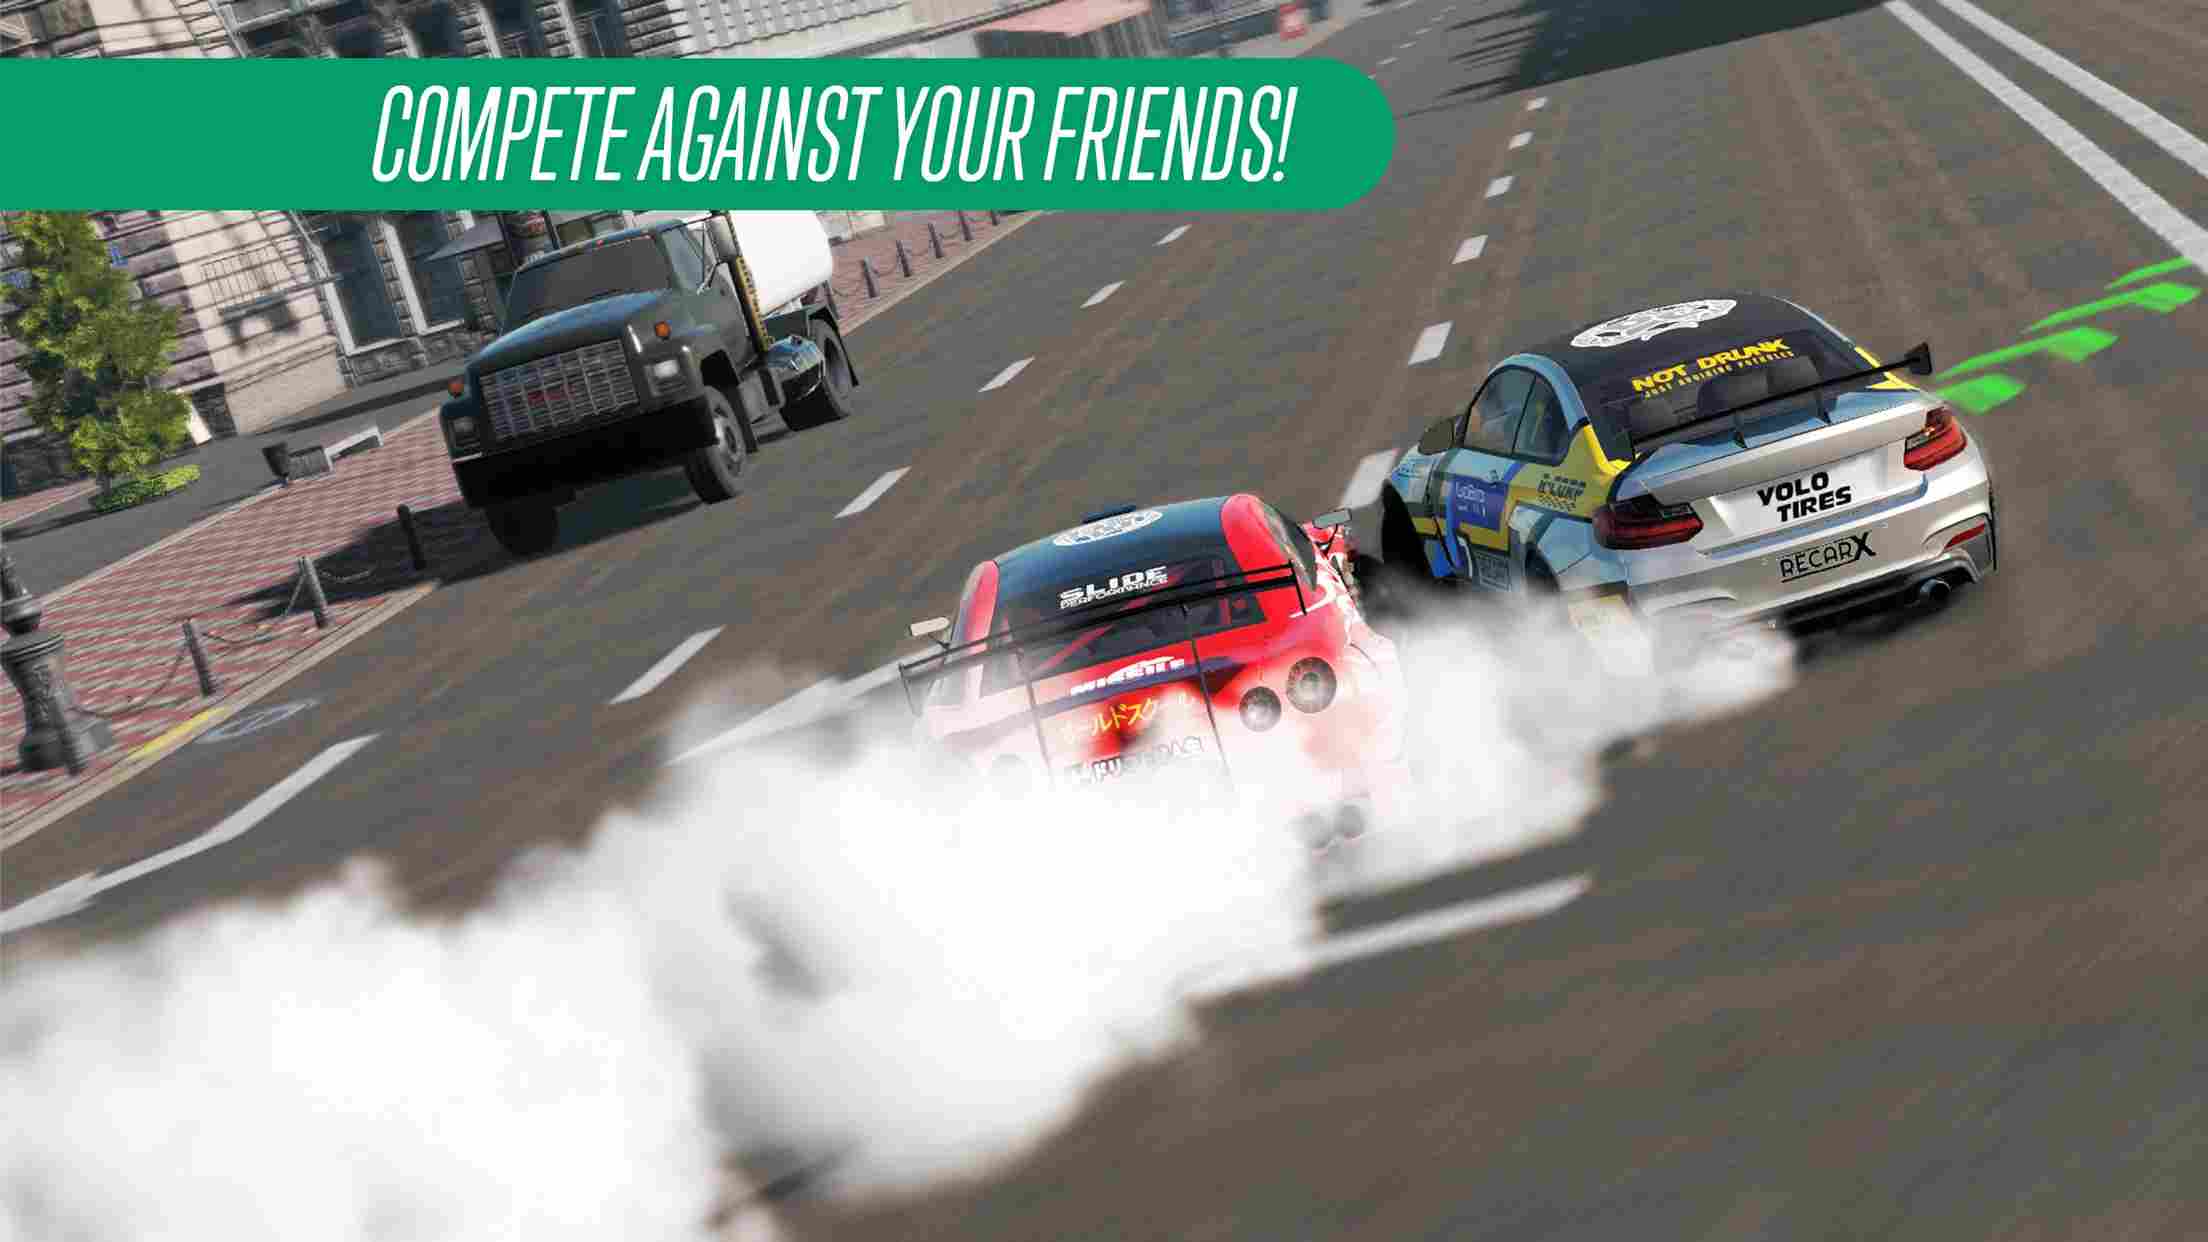 CarX Drift Racing 2 MOD APK Unlimited Money 1.6.2 The brand new carx game  has brand NEW GAME MODES and an advanced tutorial mode …